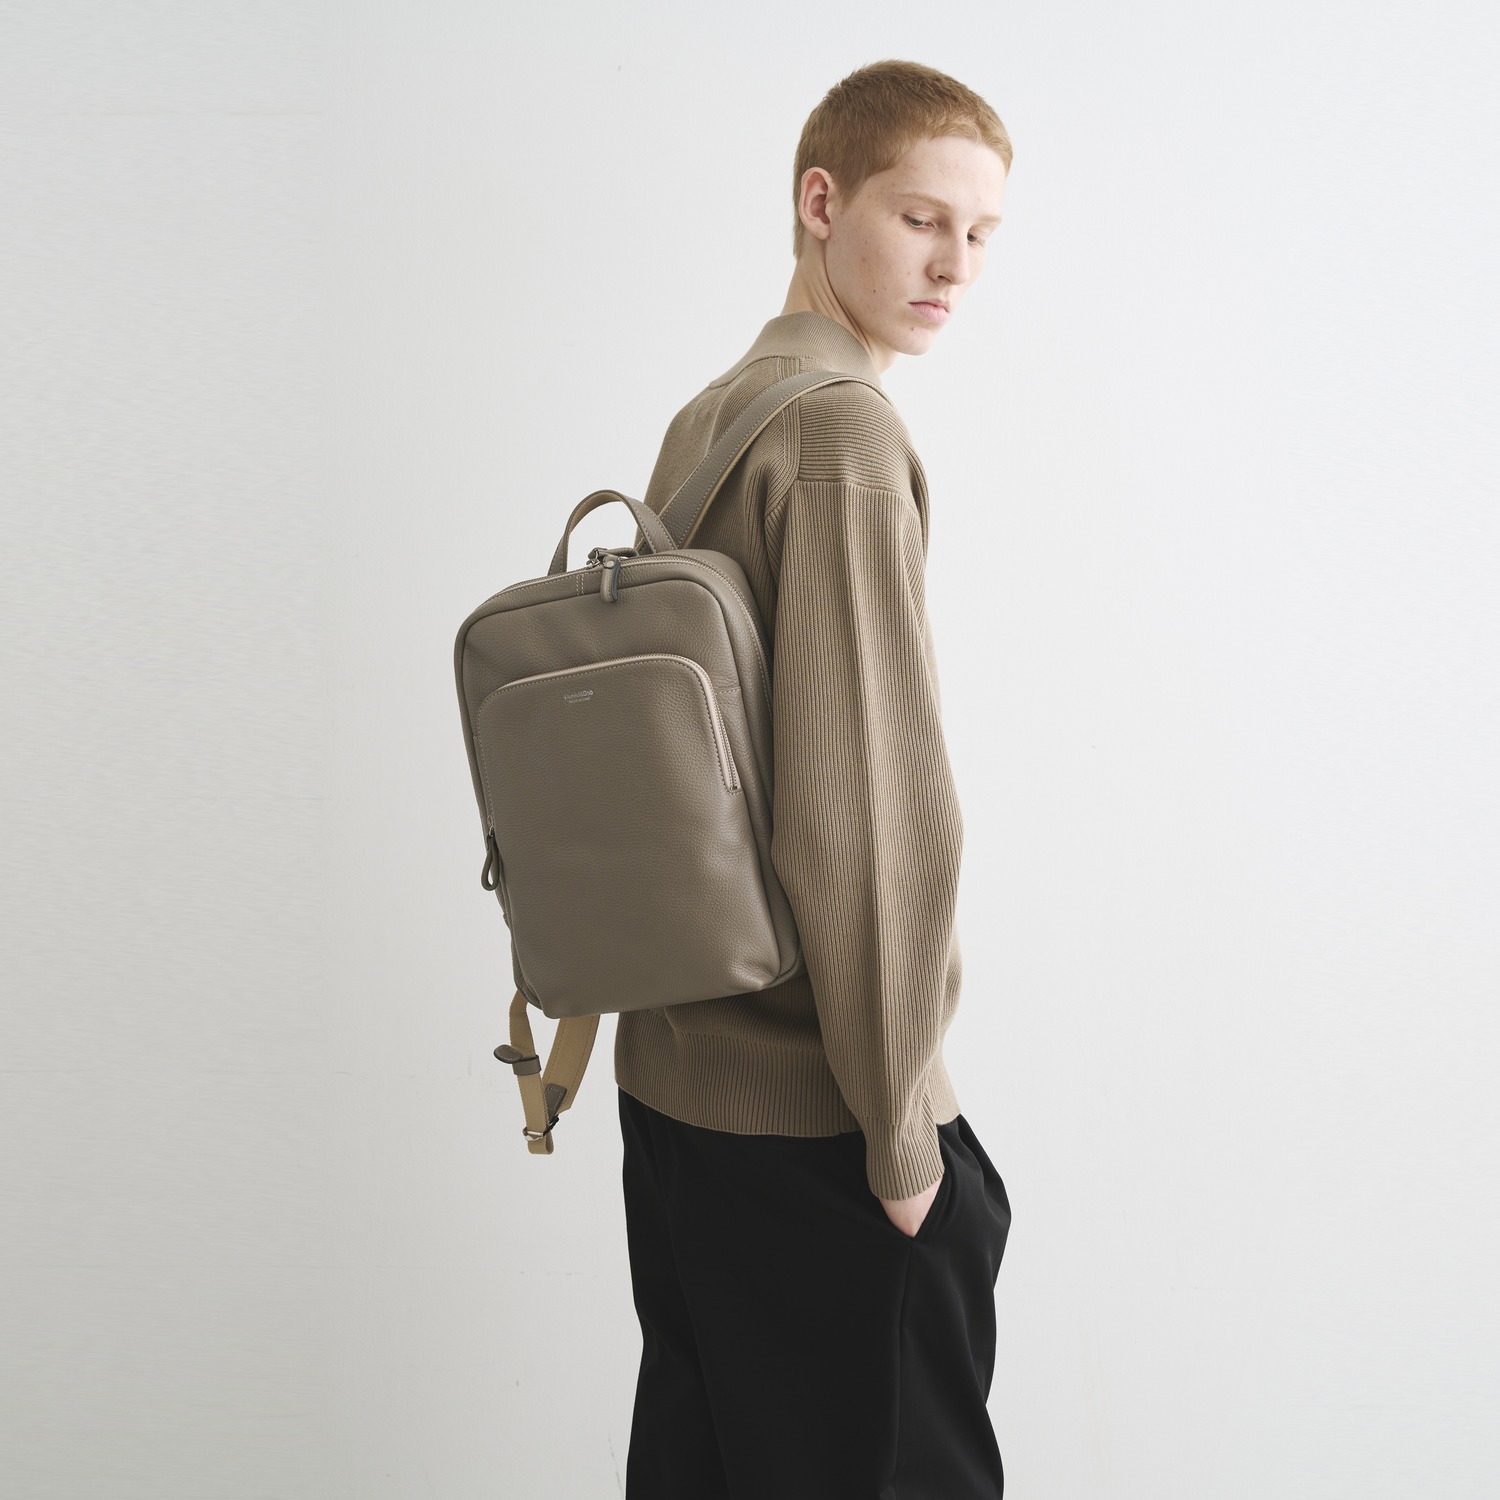 ZZ BACKPACK.27.1 ALCE accopiato 詳細画像 TAUPE 10